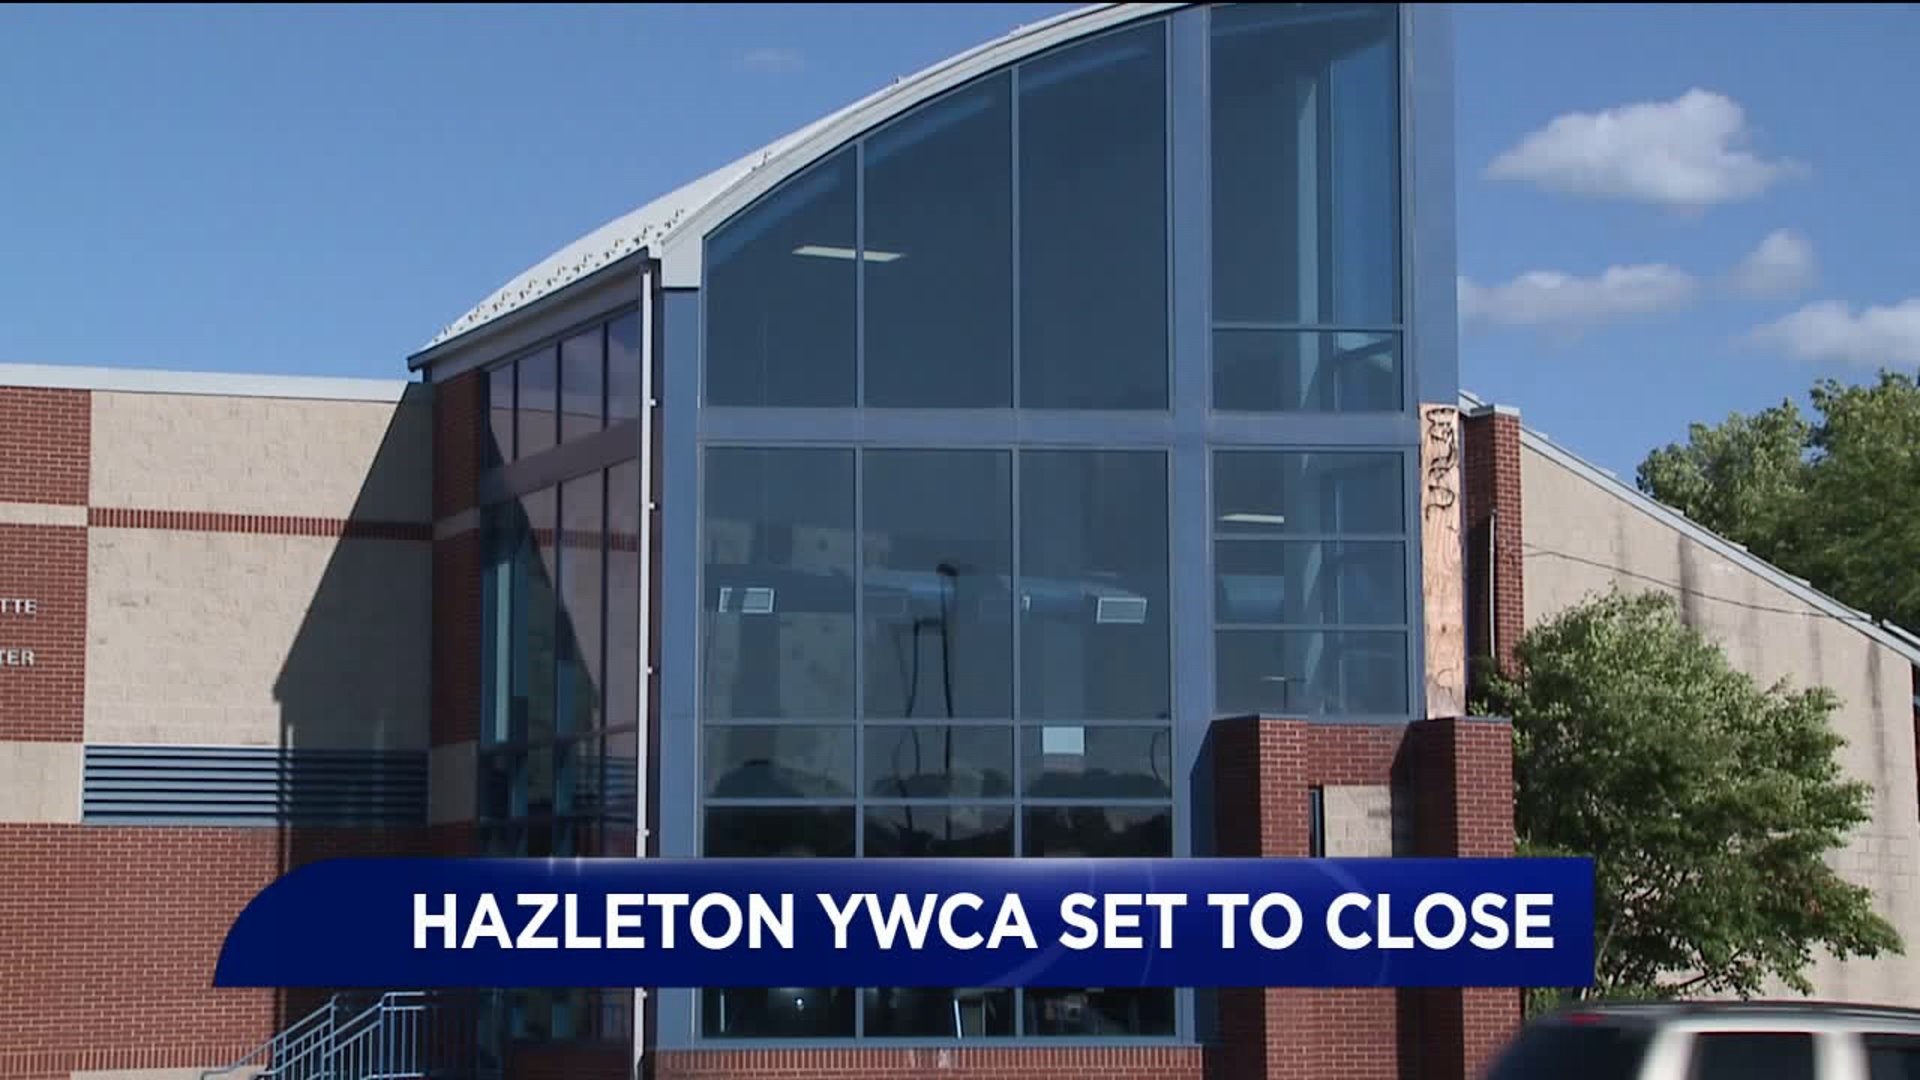 Hazleton YWCA to Close on June 30th, Board of Directors Cite Financial Troubles